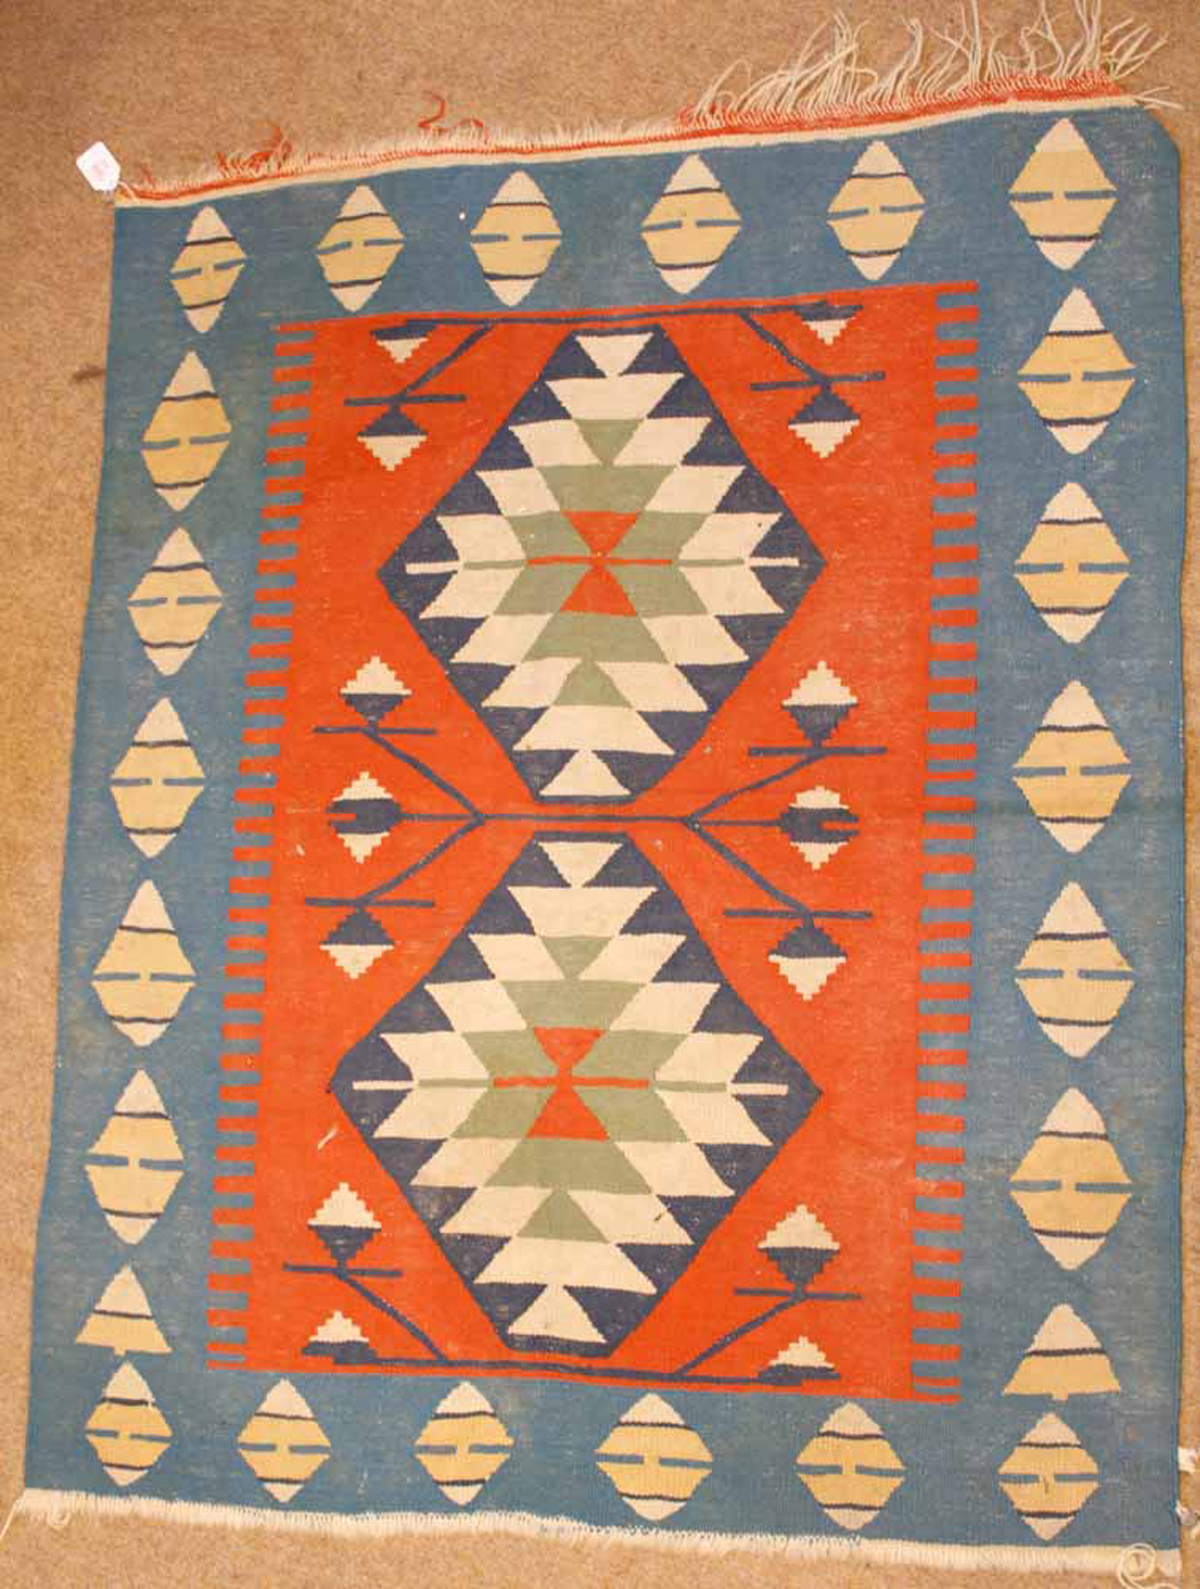 Kilim small rug and prayer mat each decorated with geometric designs on turquoise and beige ground - Image 2 of 2